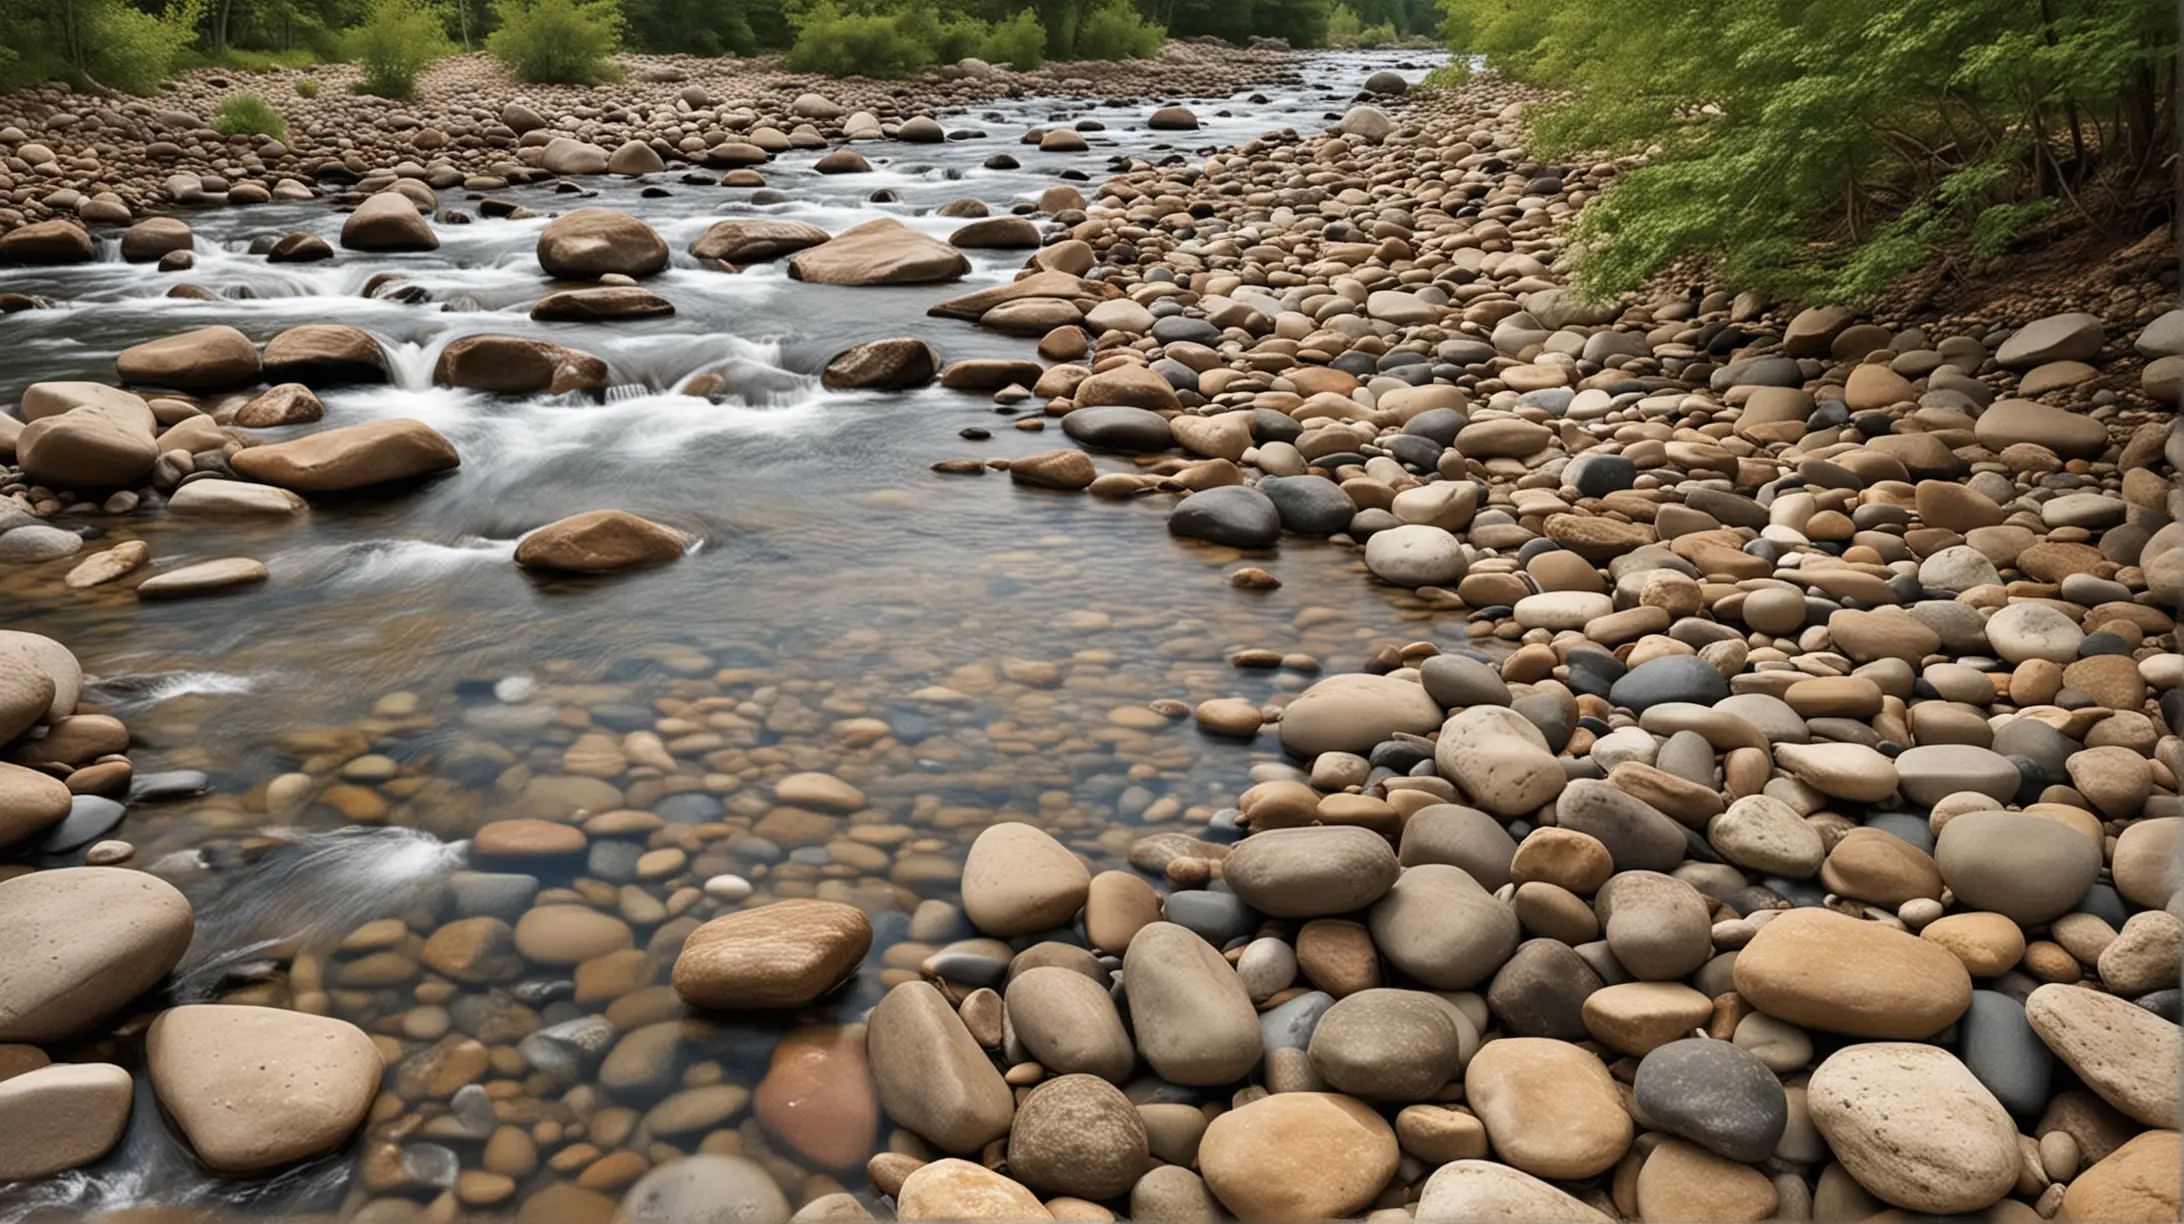 Healing Waters: Create an image featuring a tranquil river or stream, with clear waters flowing gently over smooth stones. Show African Americans seeking solace and renewal as they immerse themselves in the healing waters, symbolizing God's ability to bring comfort and restoration to our lives, as referenced in Psalm 23:2-3. 